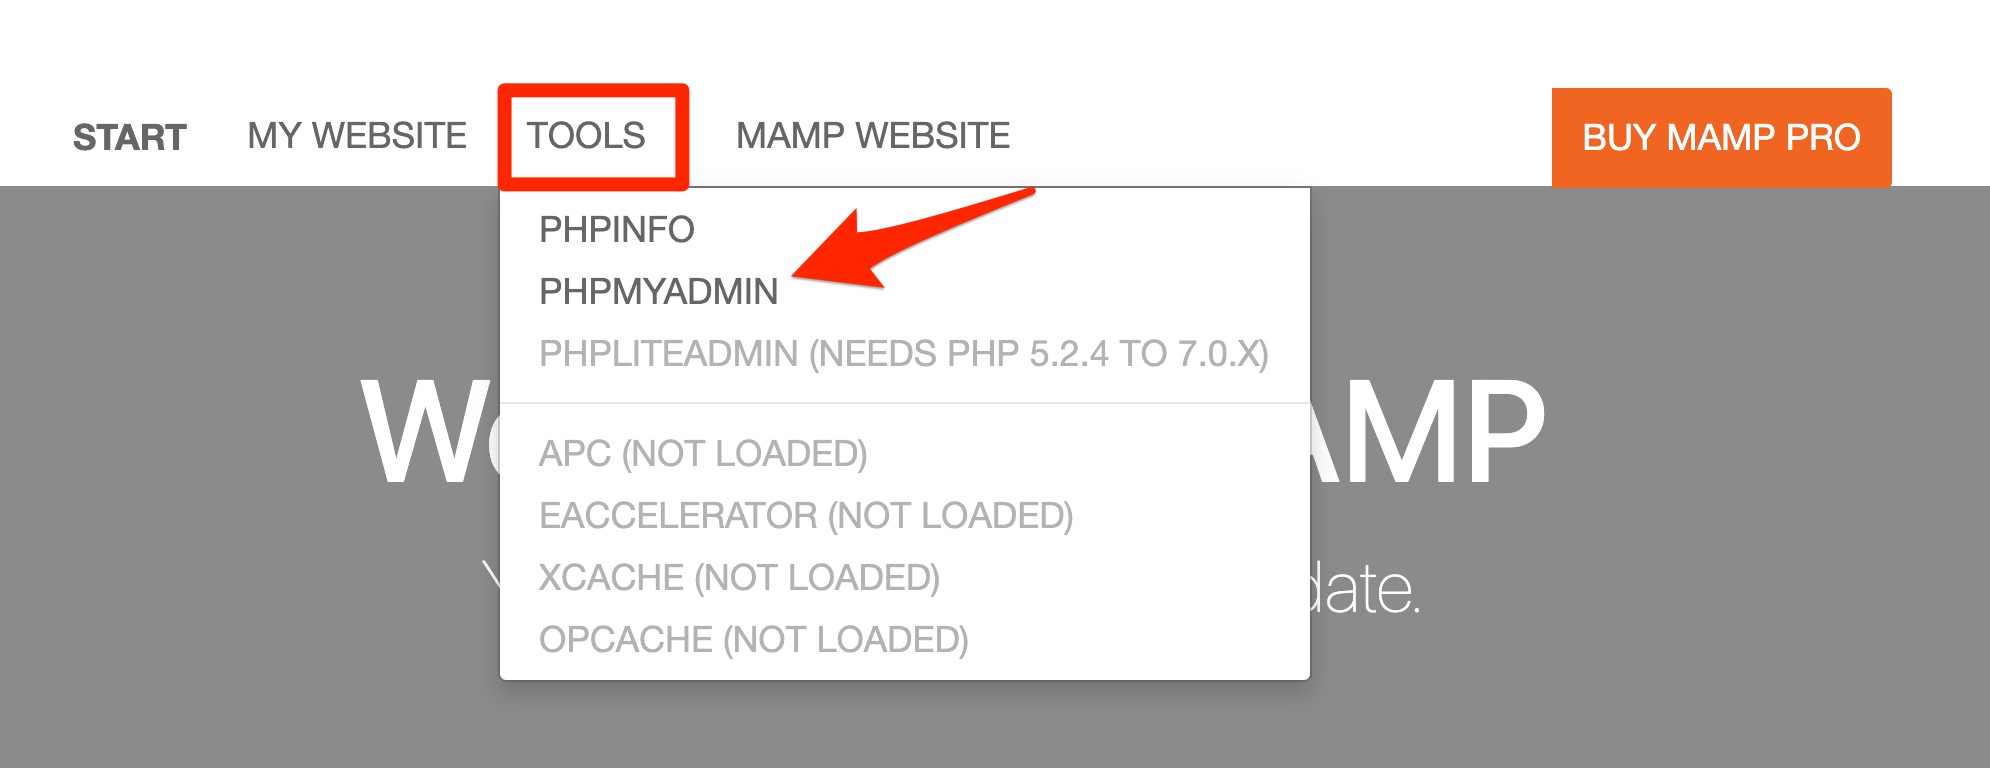 phpMyAdmin access from MAMP.